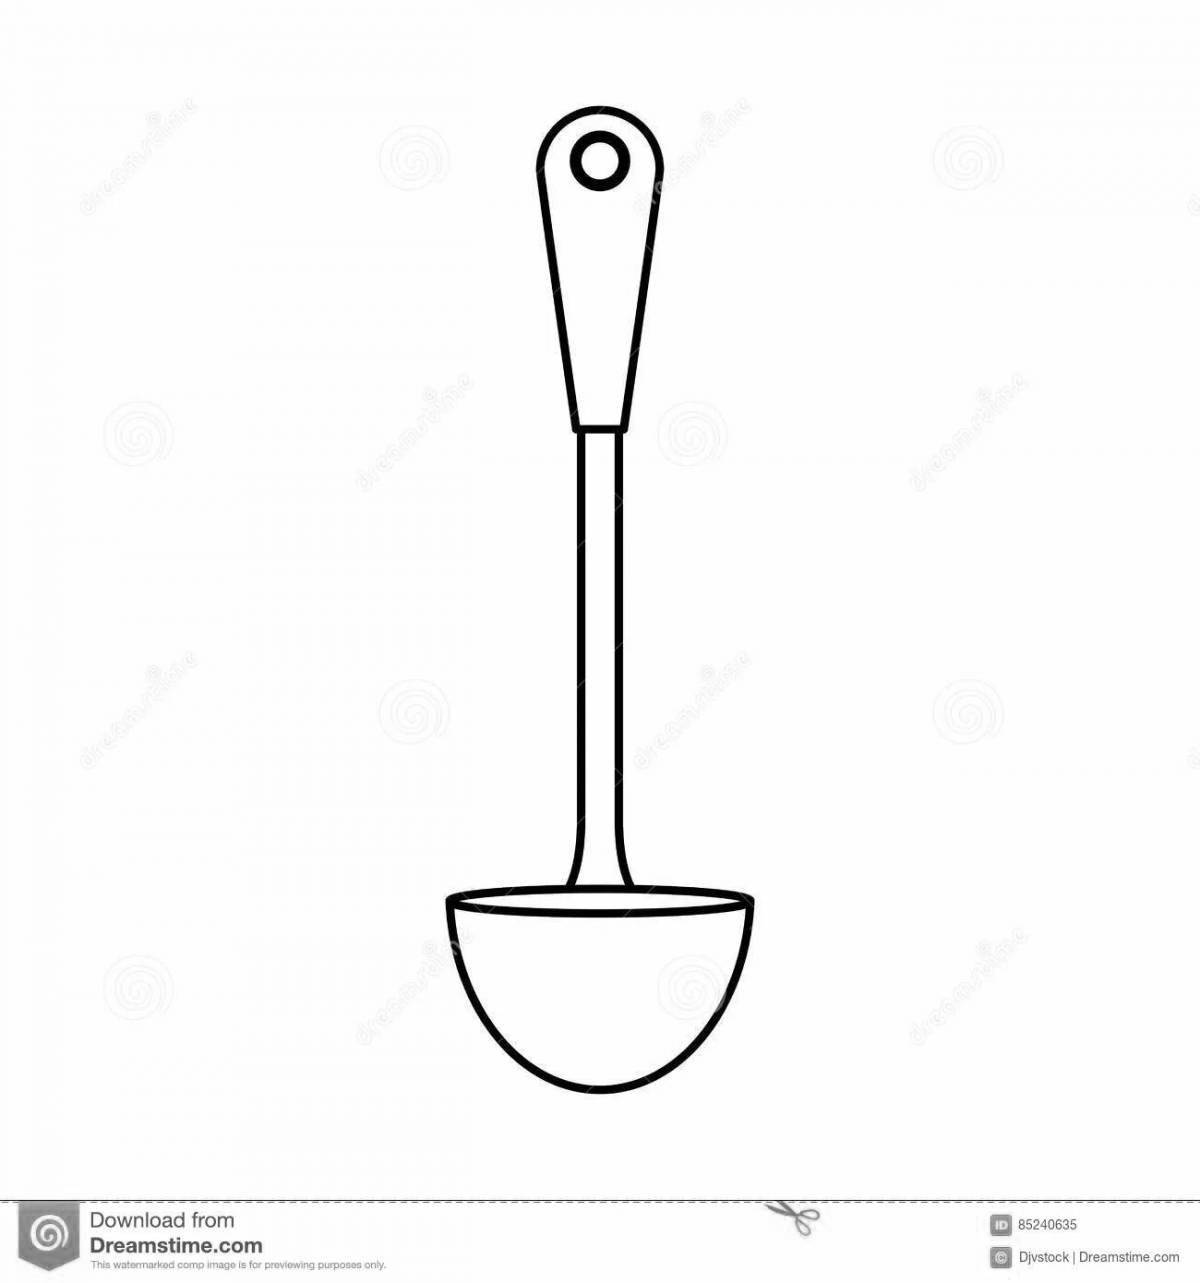 Fun coloring ladle for babies